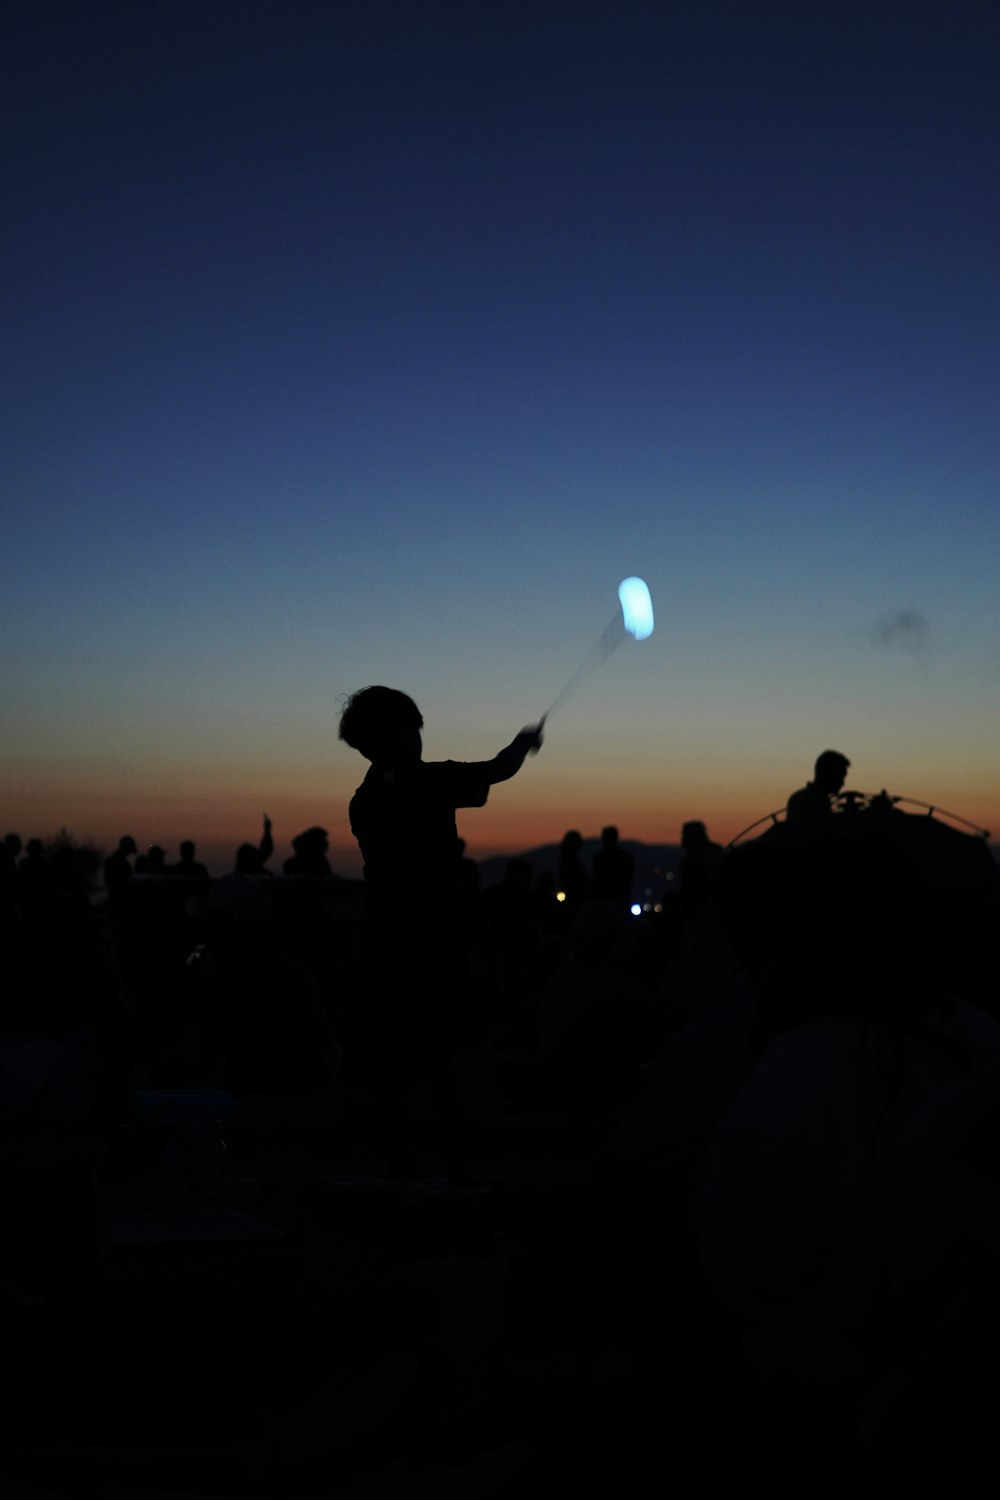 a silhouette of a person flying a kite at sunset